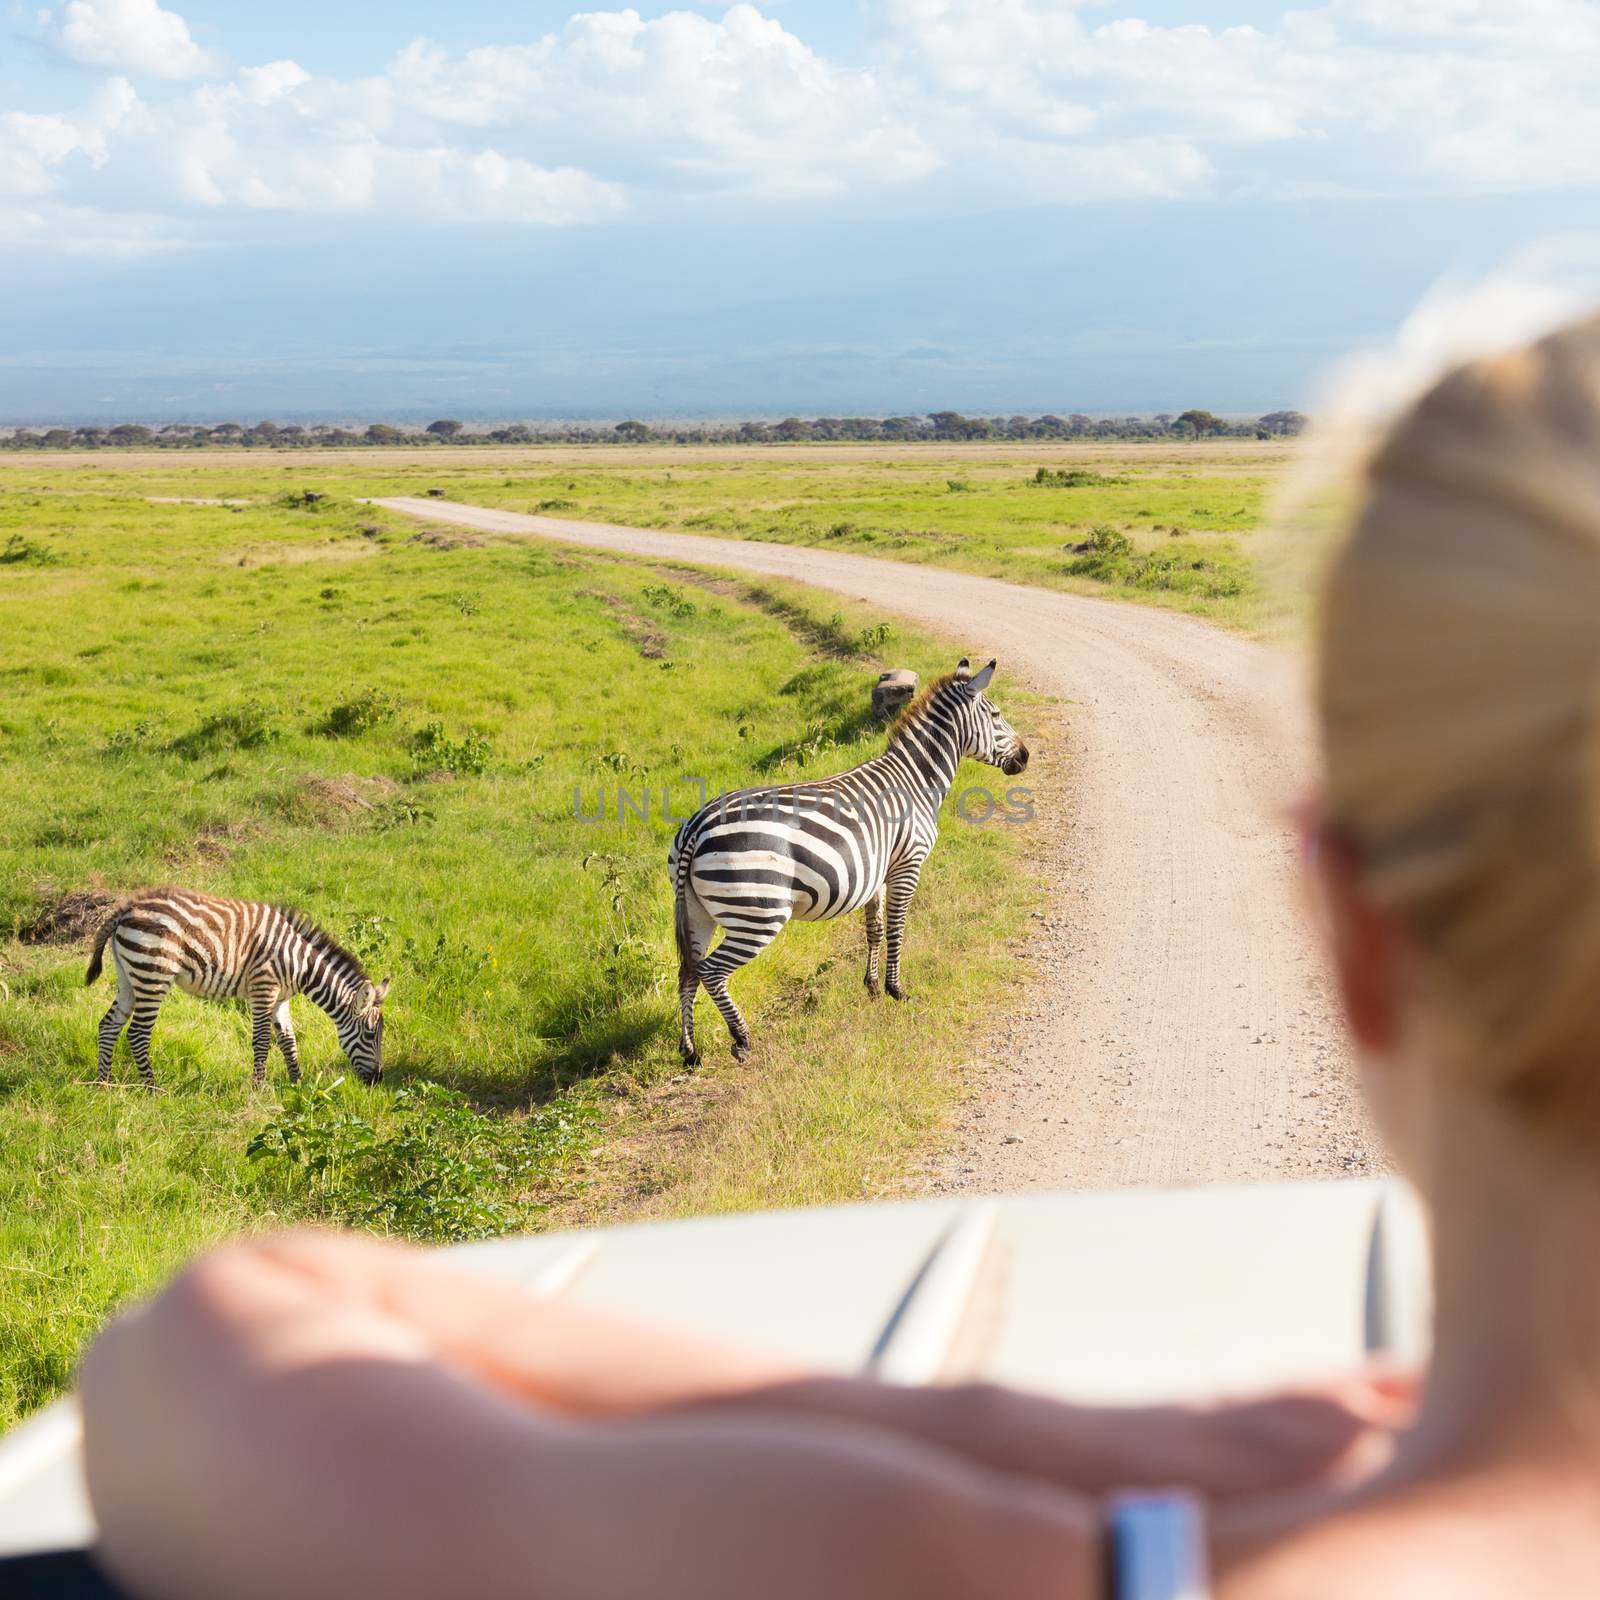 Woman on african wildlife safari observing zebras from open roof safari jeep. Rear view. Focus on zebras.